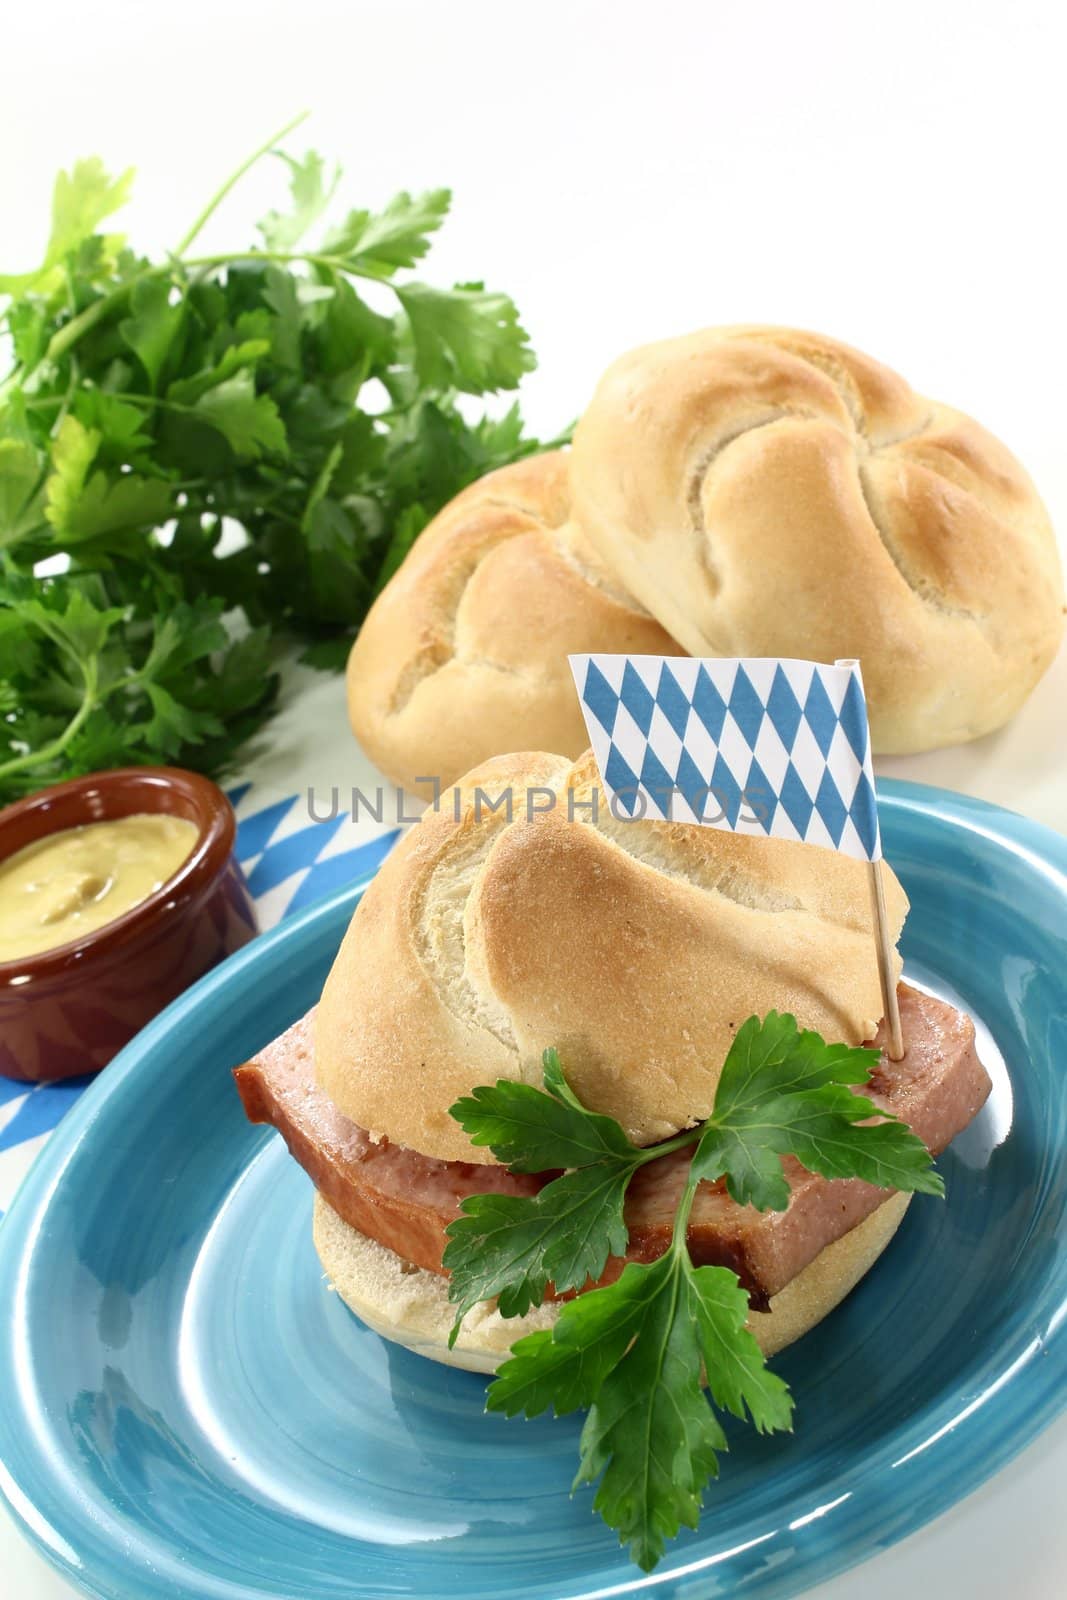 a bread roll with beef and pork loaf and parsley